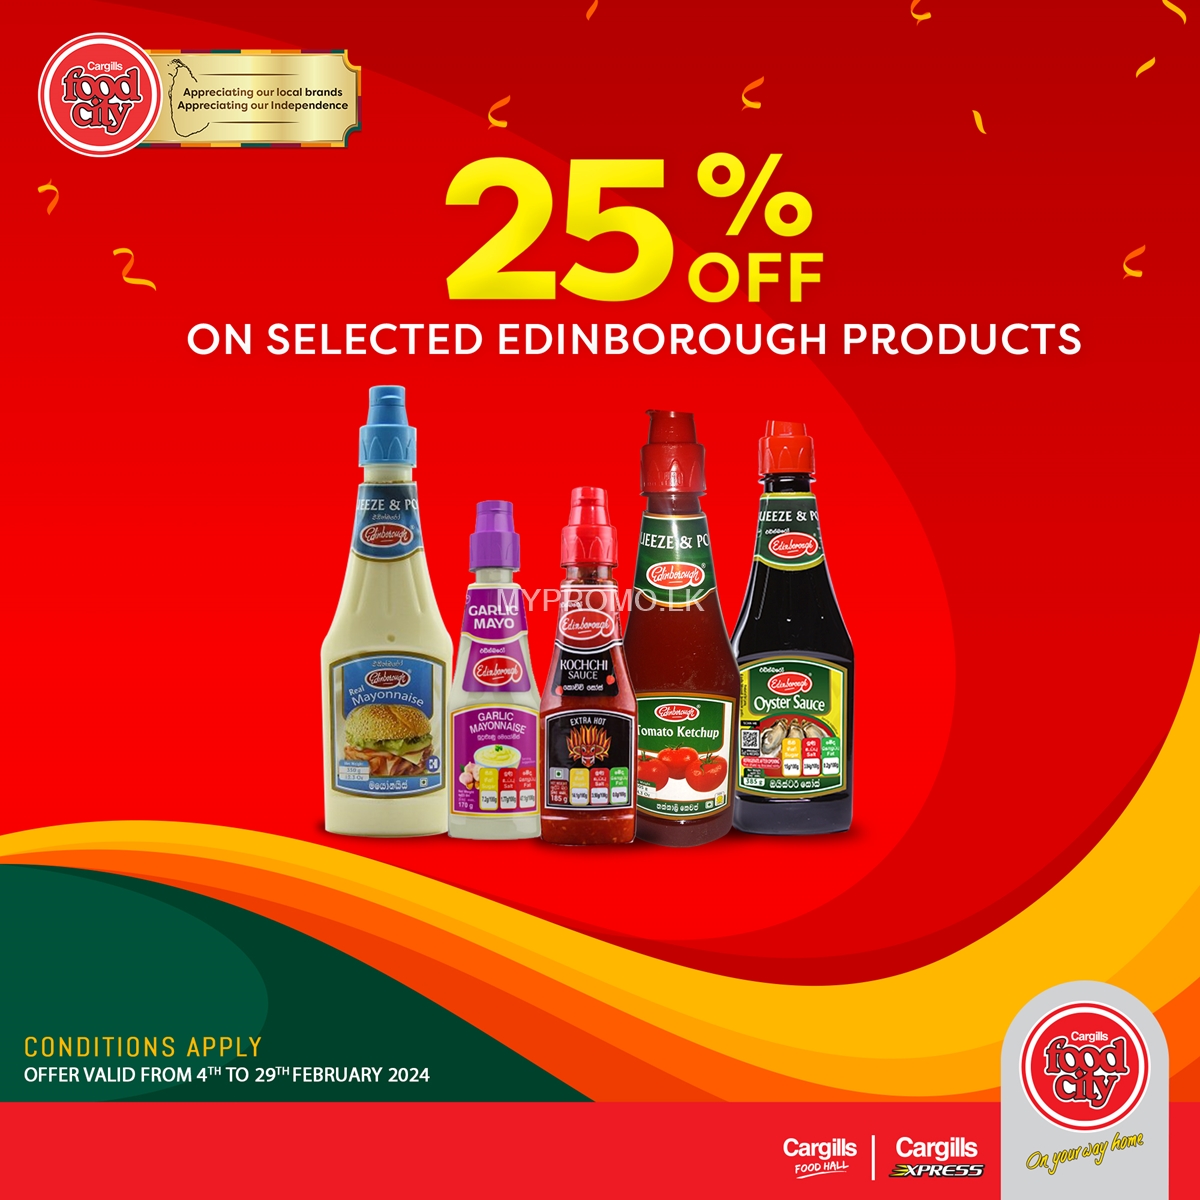 25% Off on selected Edinborough Products at Cargills Food City